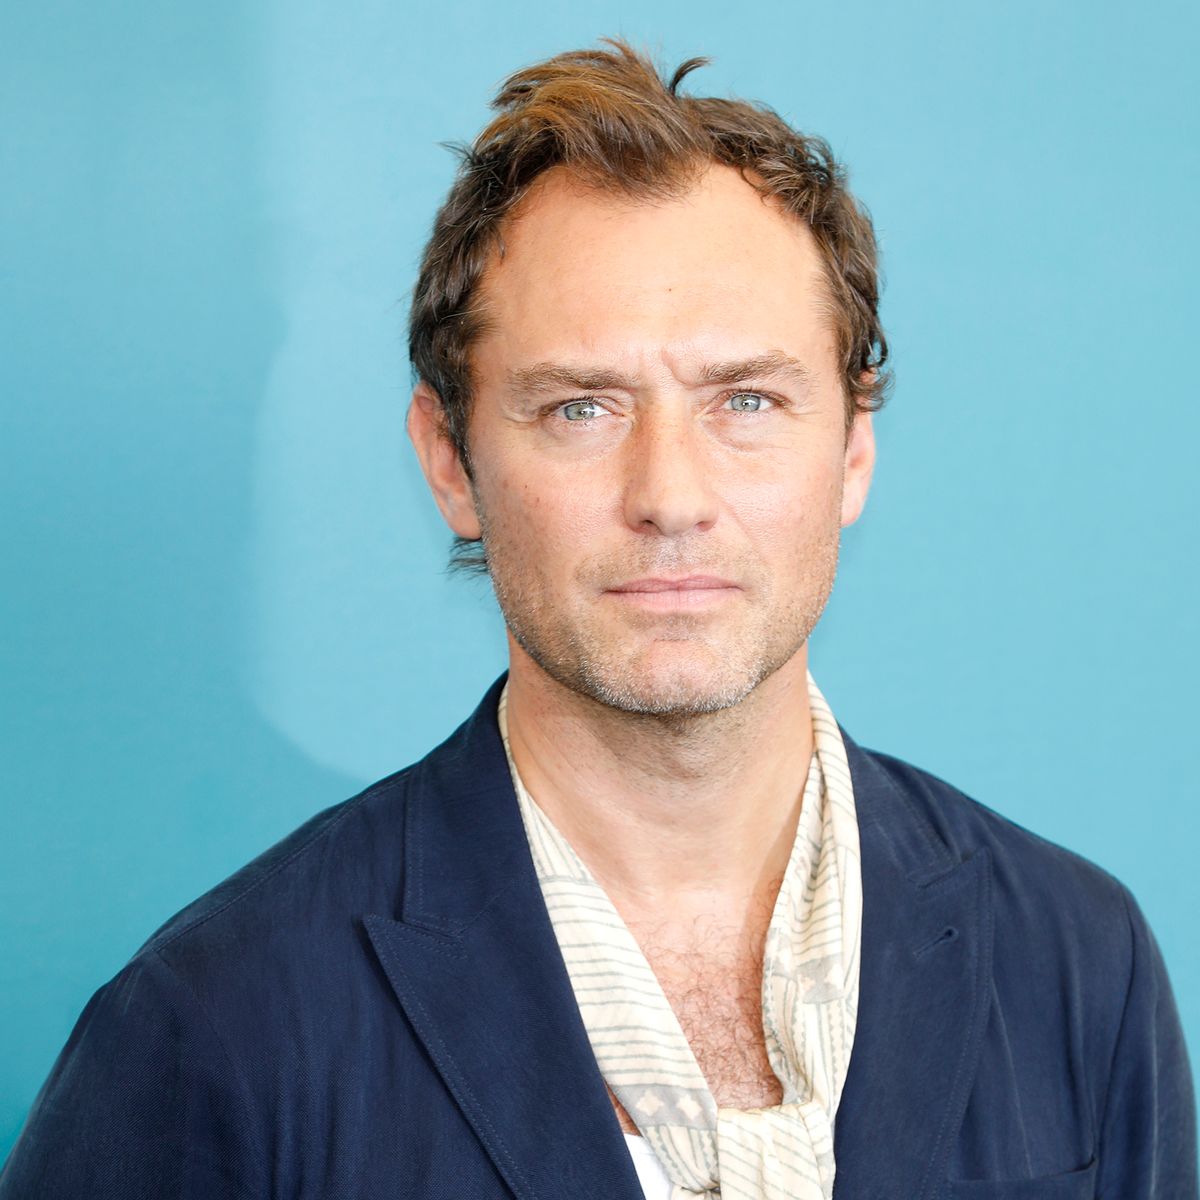 Jude Law - 76th Venice Film FestivalVENICE, ITALY - SEPTEMBER 1: (EDITORS NOTE: Image has been digitally retouched) Jude Law attends the photo call for 'The New Pope' during the 76th Venice Film Festival on September 1, 2019 in Venice, Italy. (Photo by Kurt Krieger/Corbis via Getty Images)